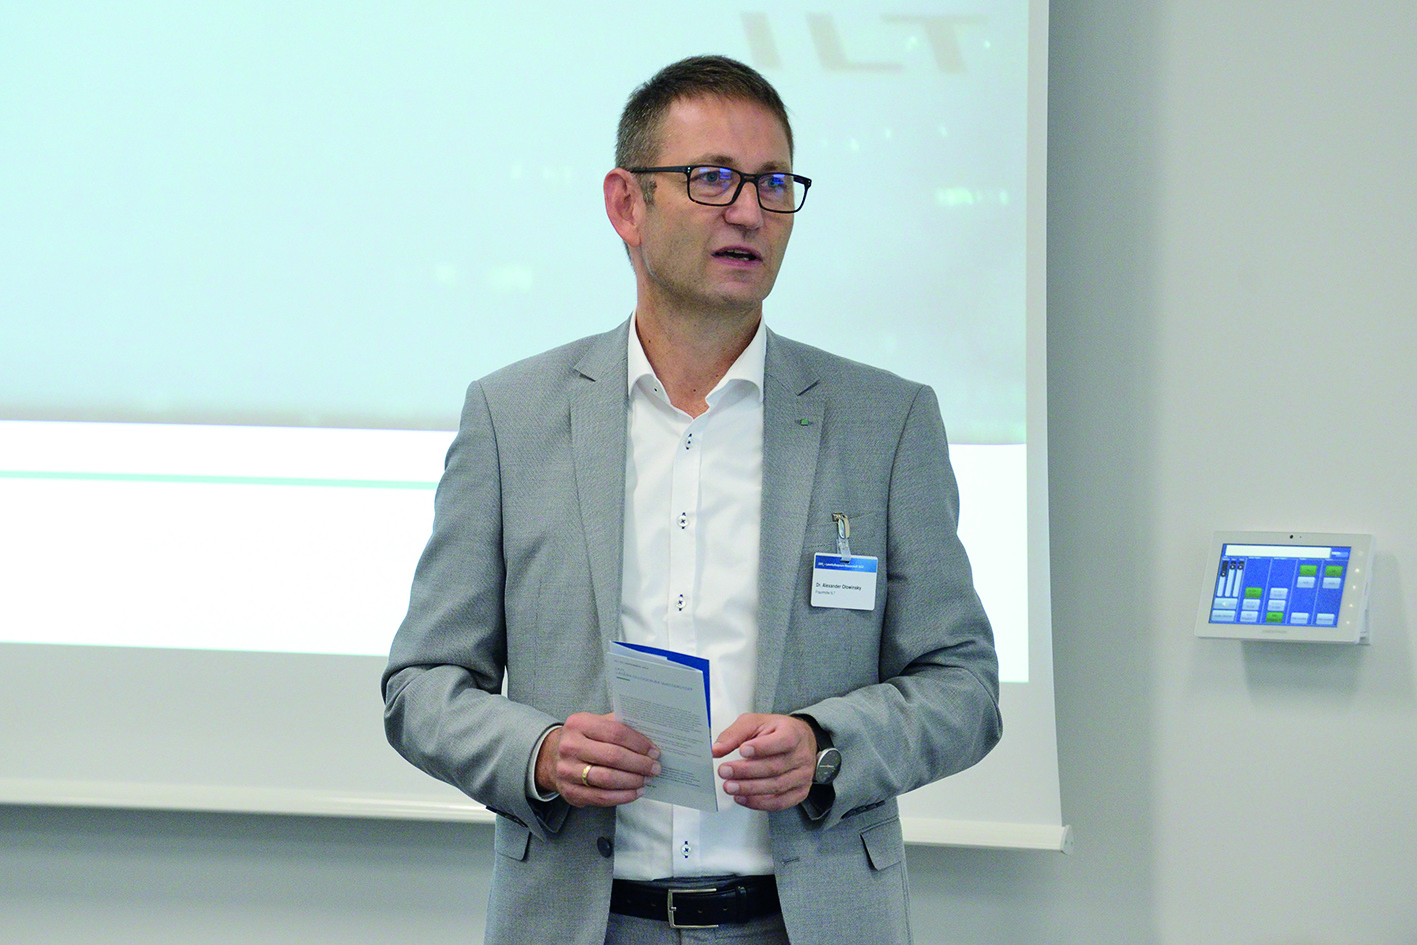 Dr. Alexander Olowinsky, initiator of the LKH2 Laser Colloquium Hydrogen and head of the Joining and Cutting department at Fraunhofer ILT: “Since we offer a wide variety of practical applications, our new hydrogen laboratory is unique.”